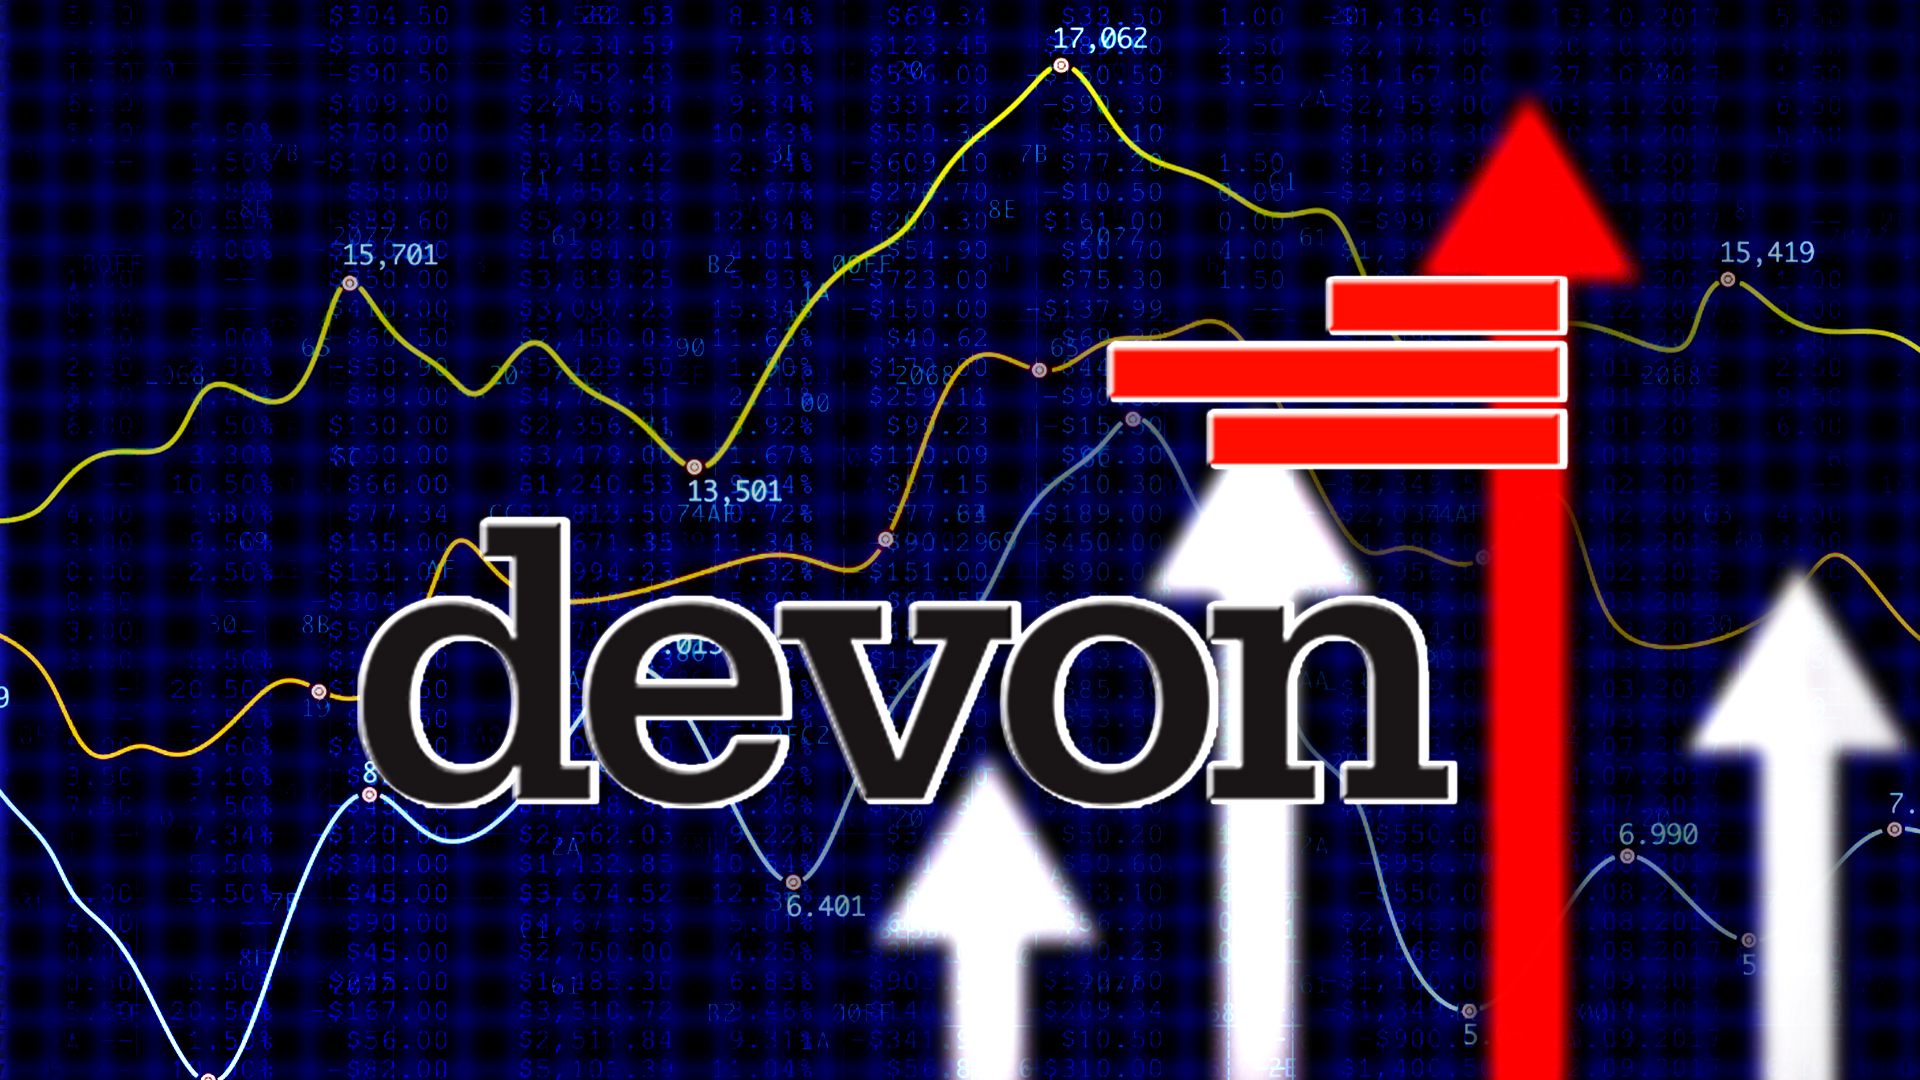 Devon Energy Corp. Respecting the Support Level: Will Price Rise?